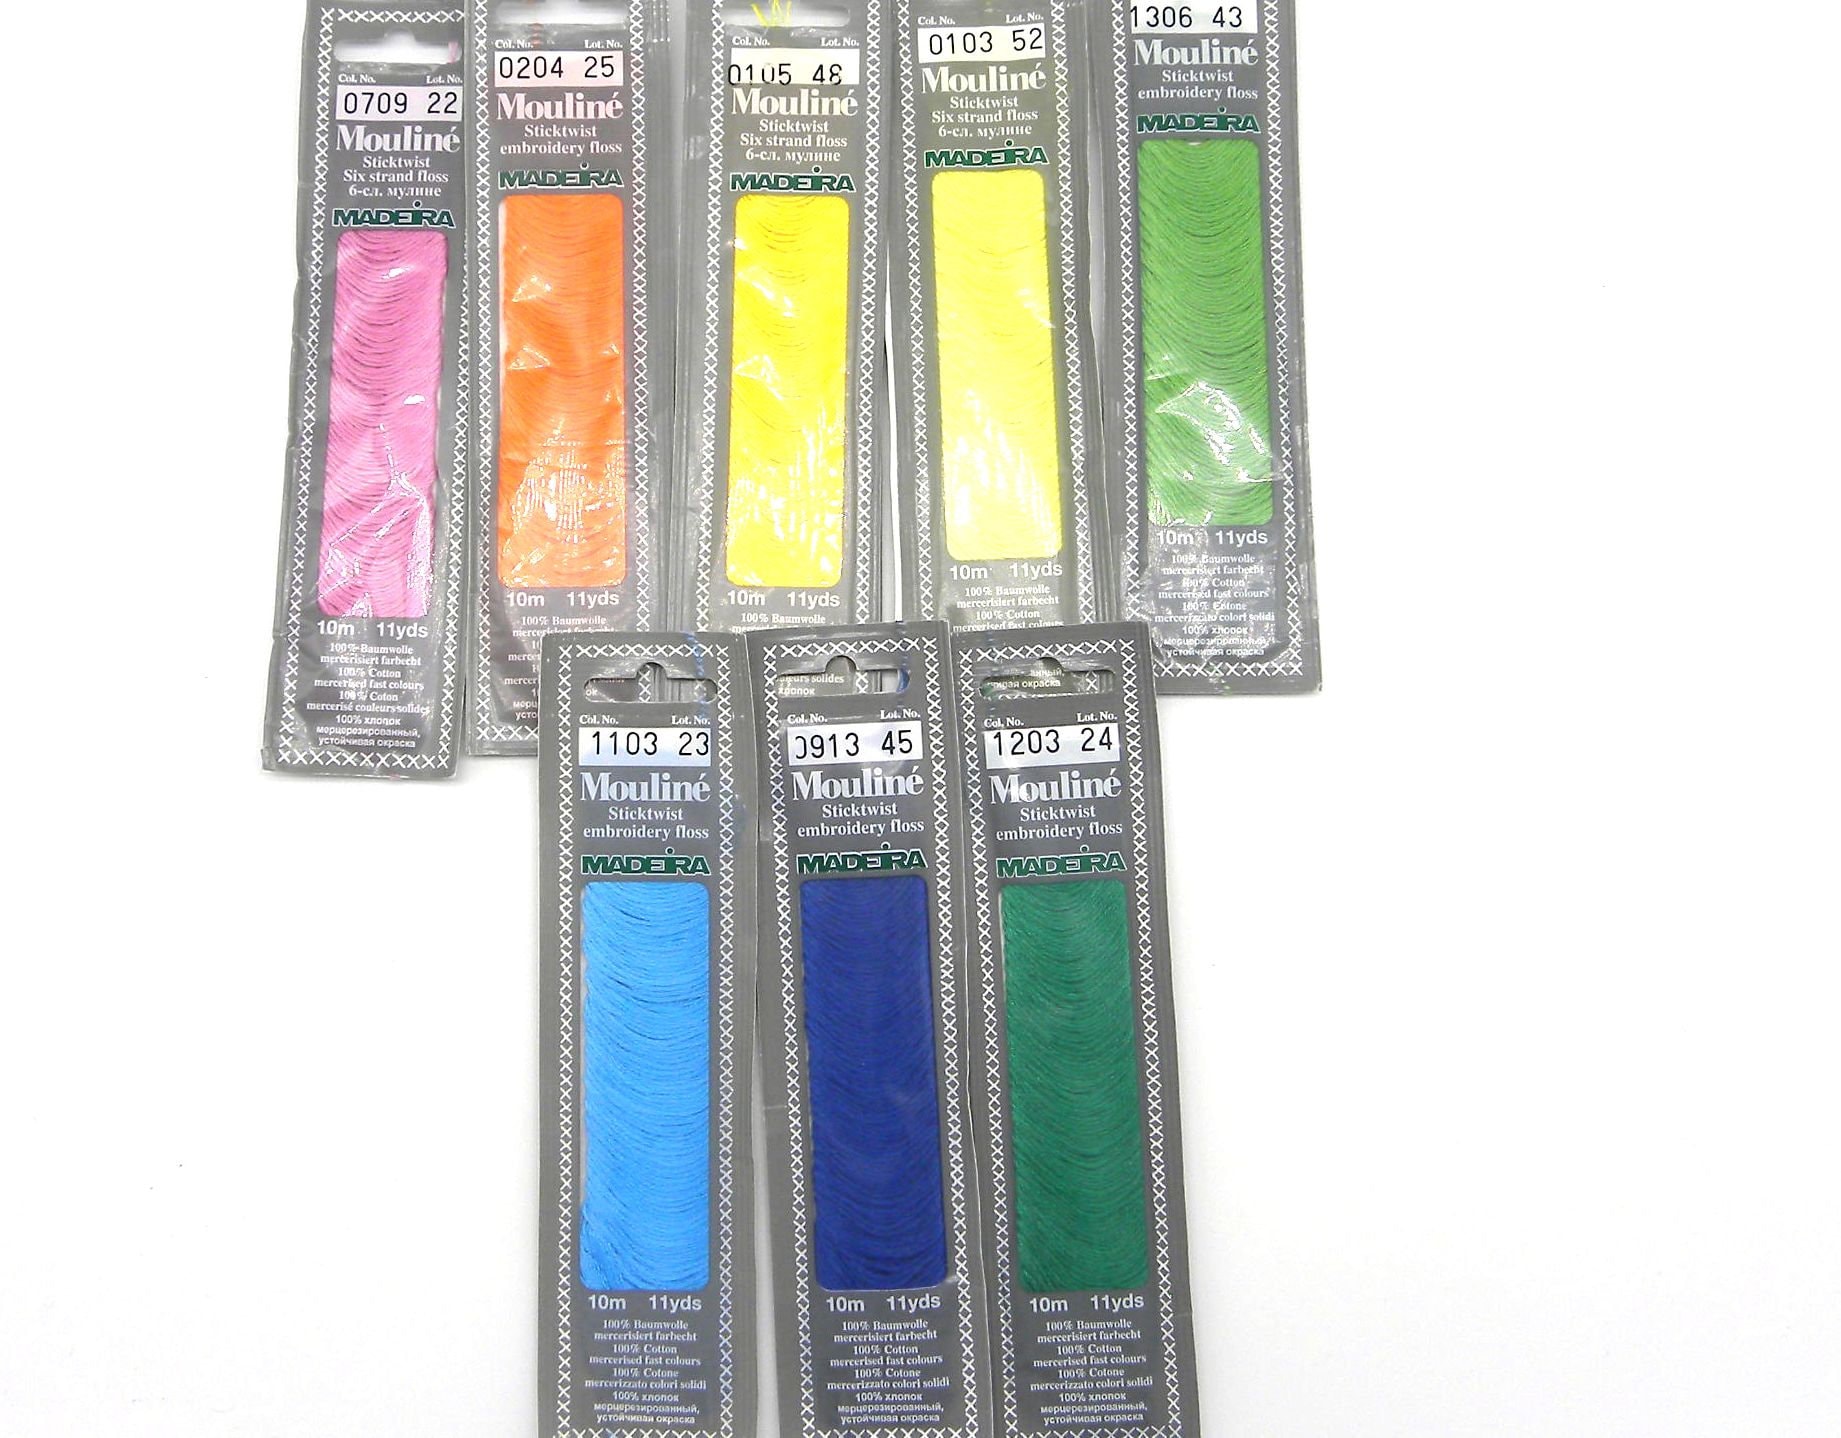 Embroidery Floss 6 Strands Friendship Bracelet String Cross Stitch Cotton  Thread 24, 36, 50 or 100 Colours 